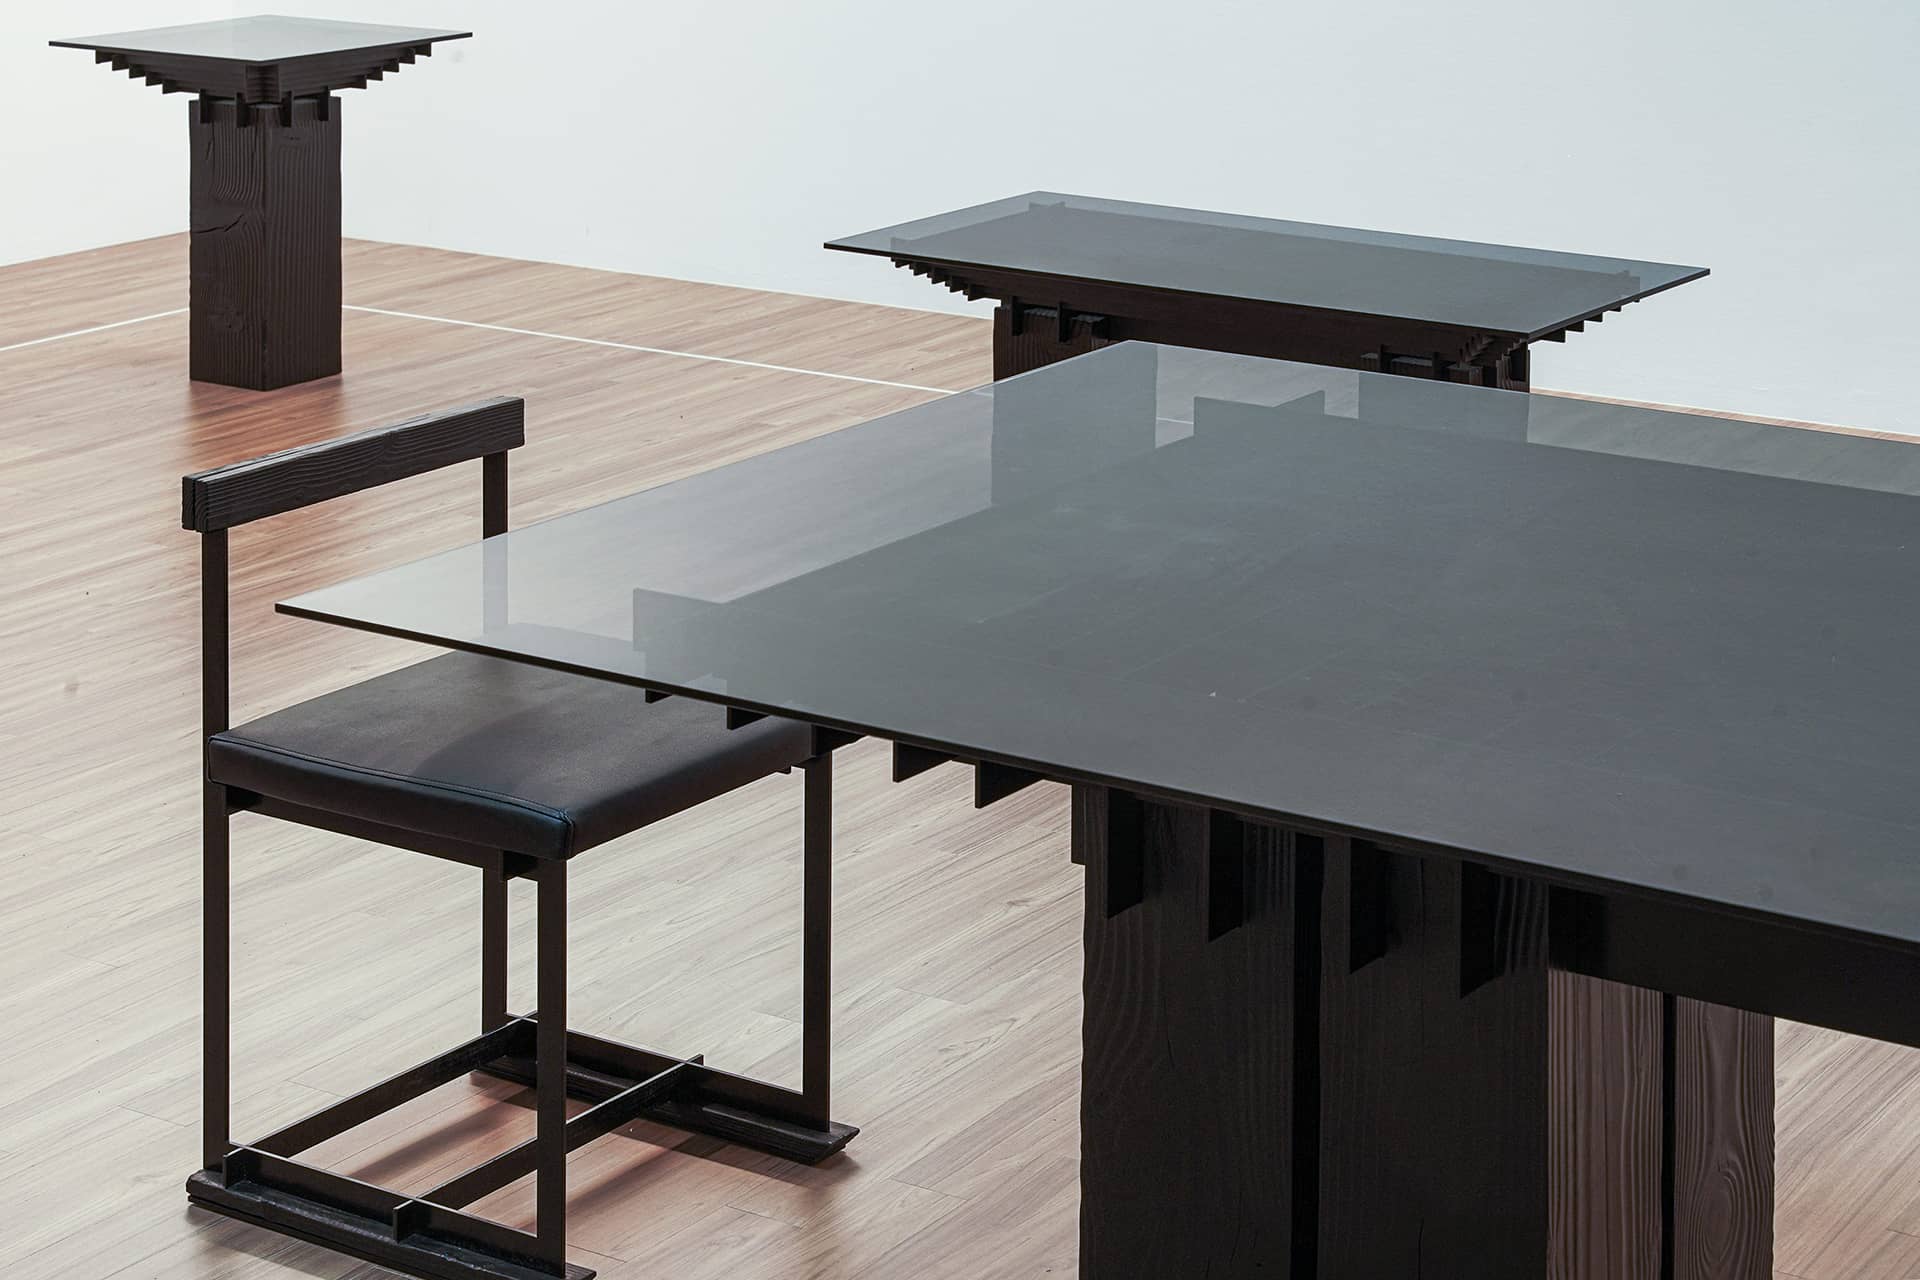 Angular photography of table and chair collection